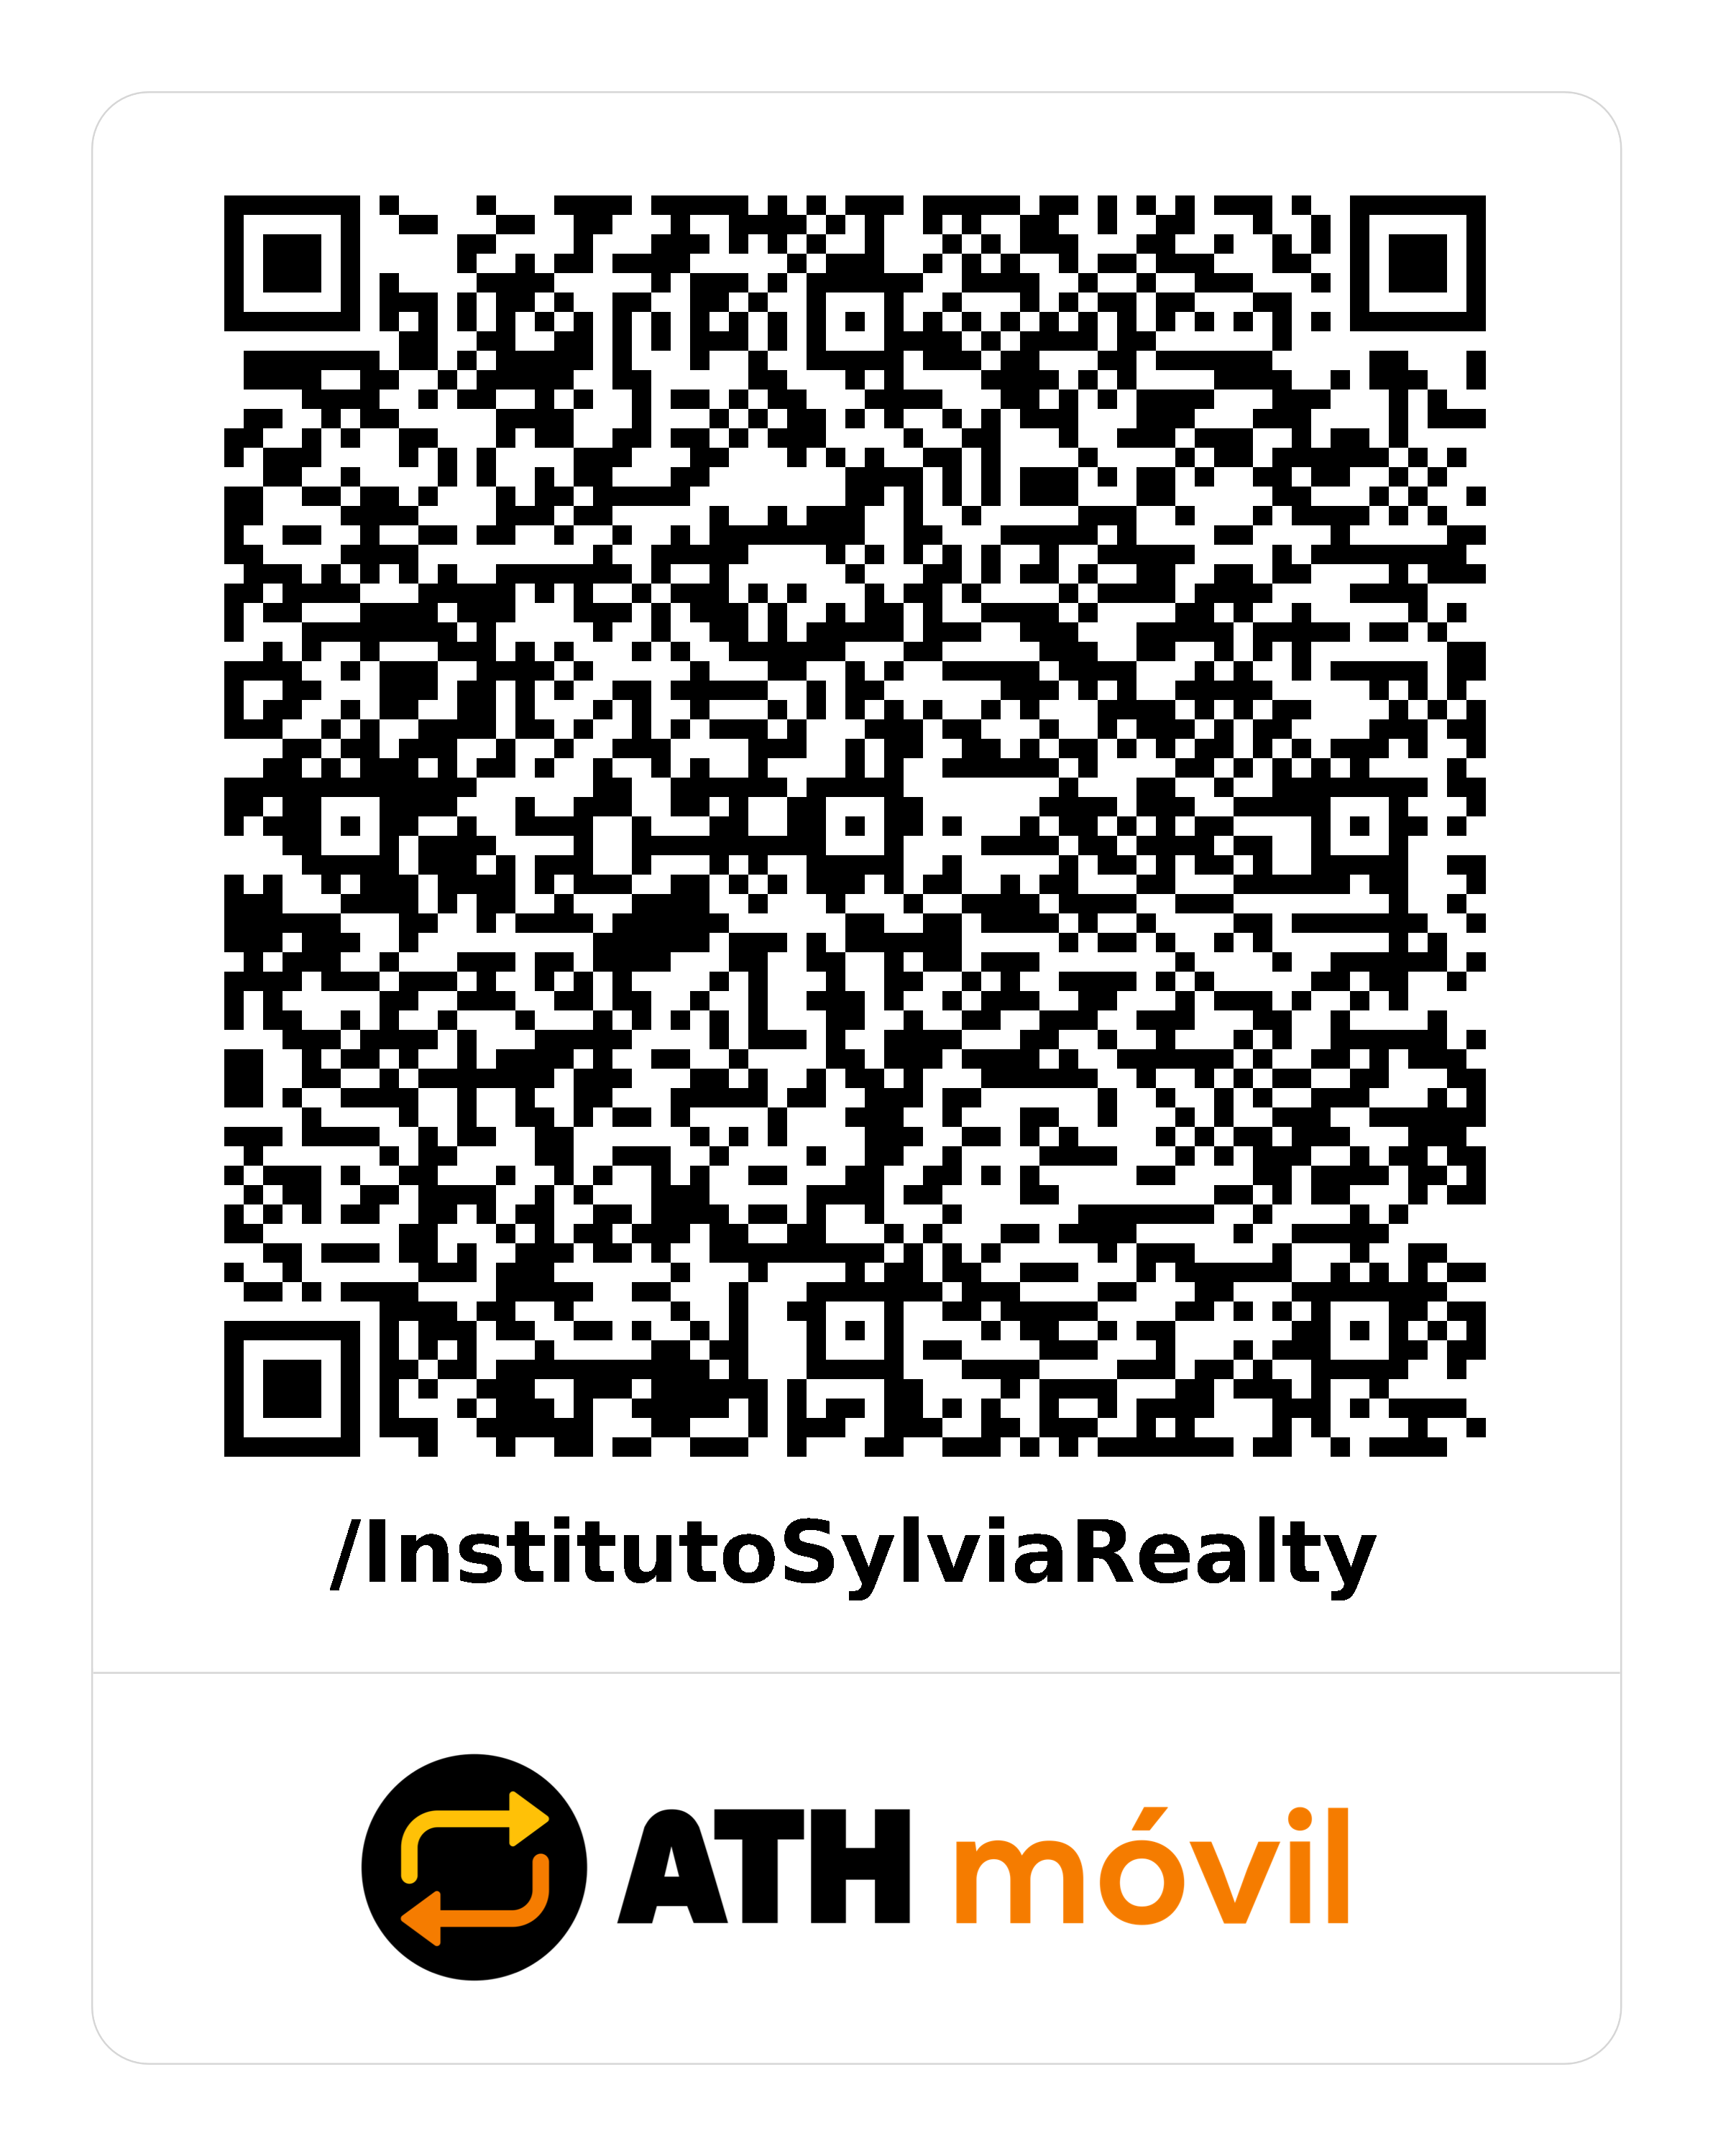 ath-movil_qrcode-institutosylviarealty